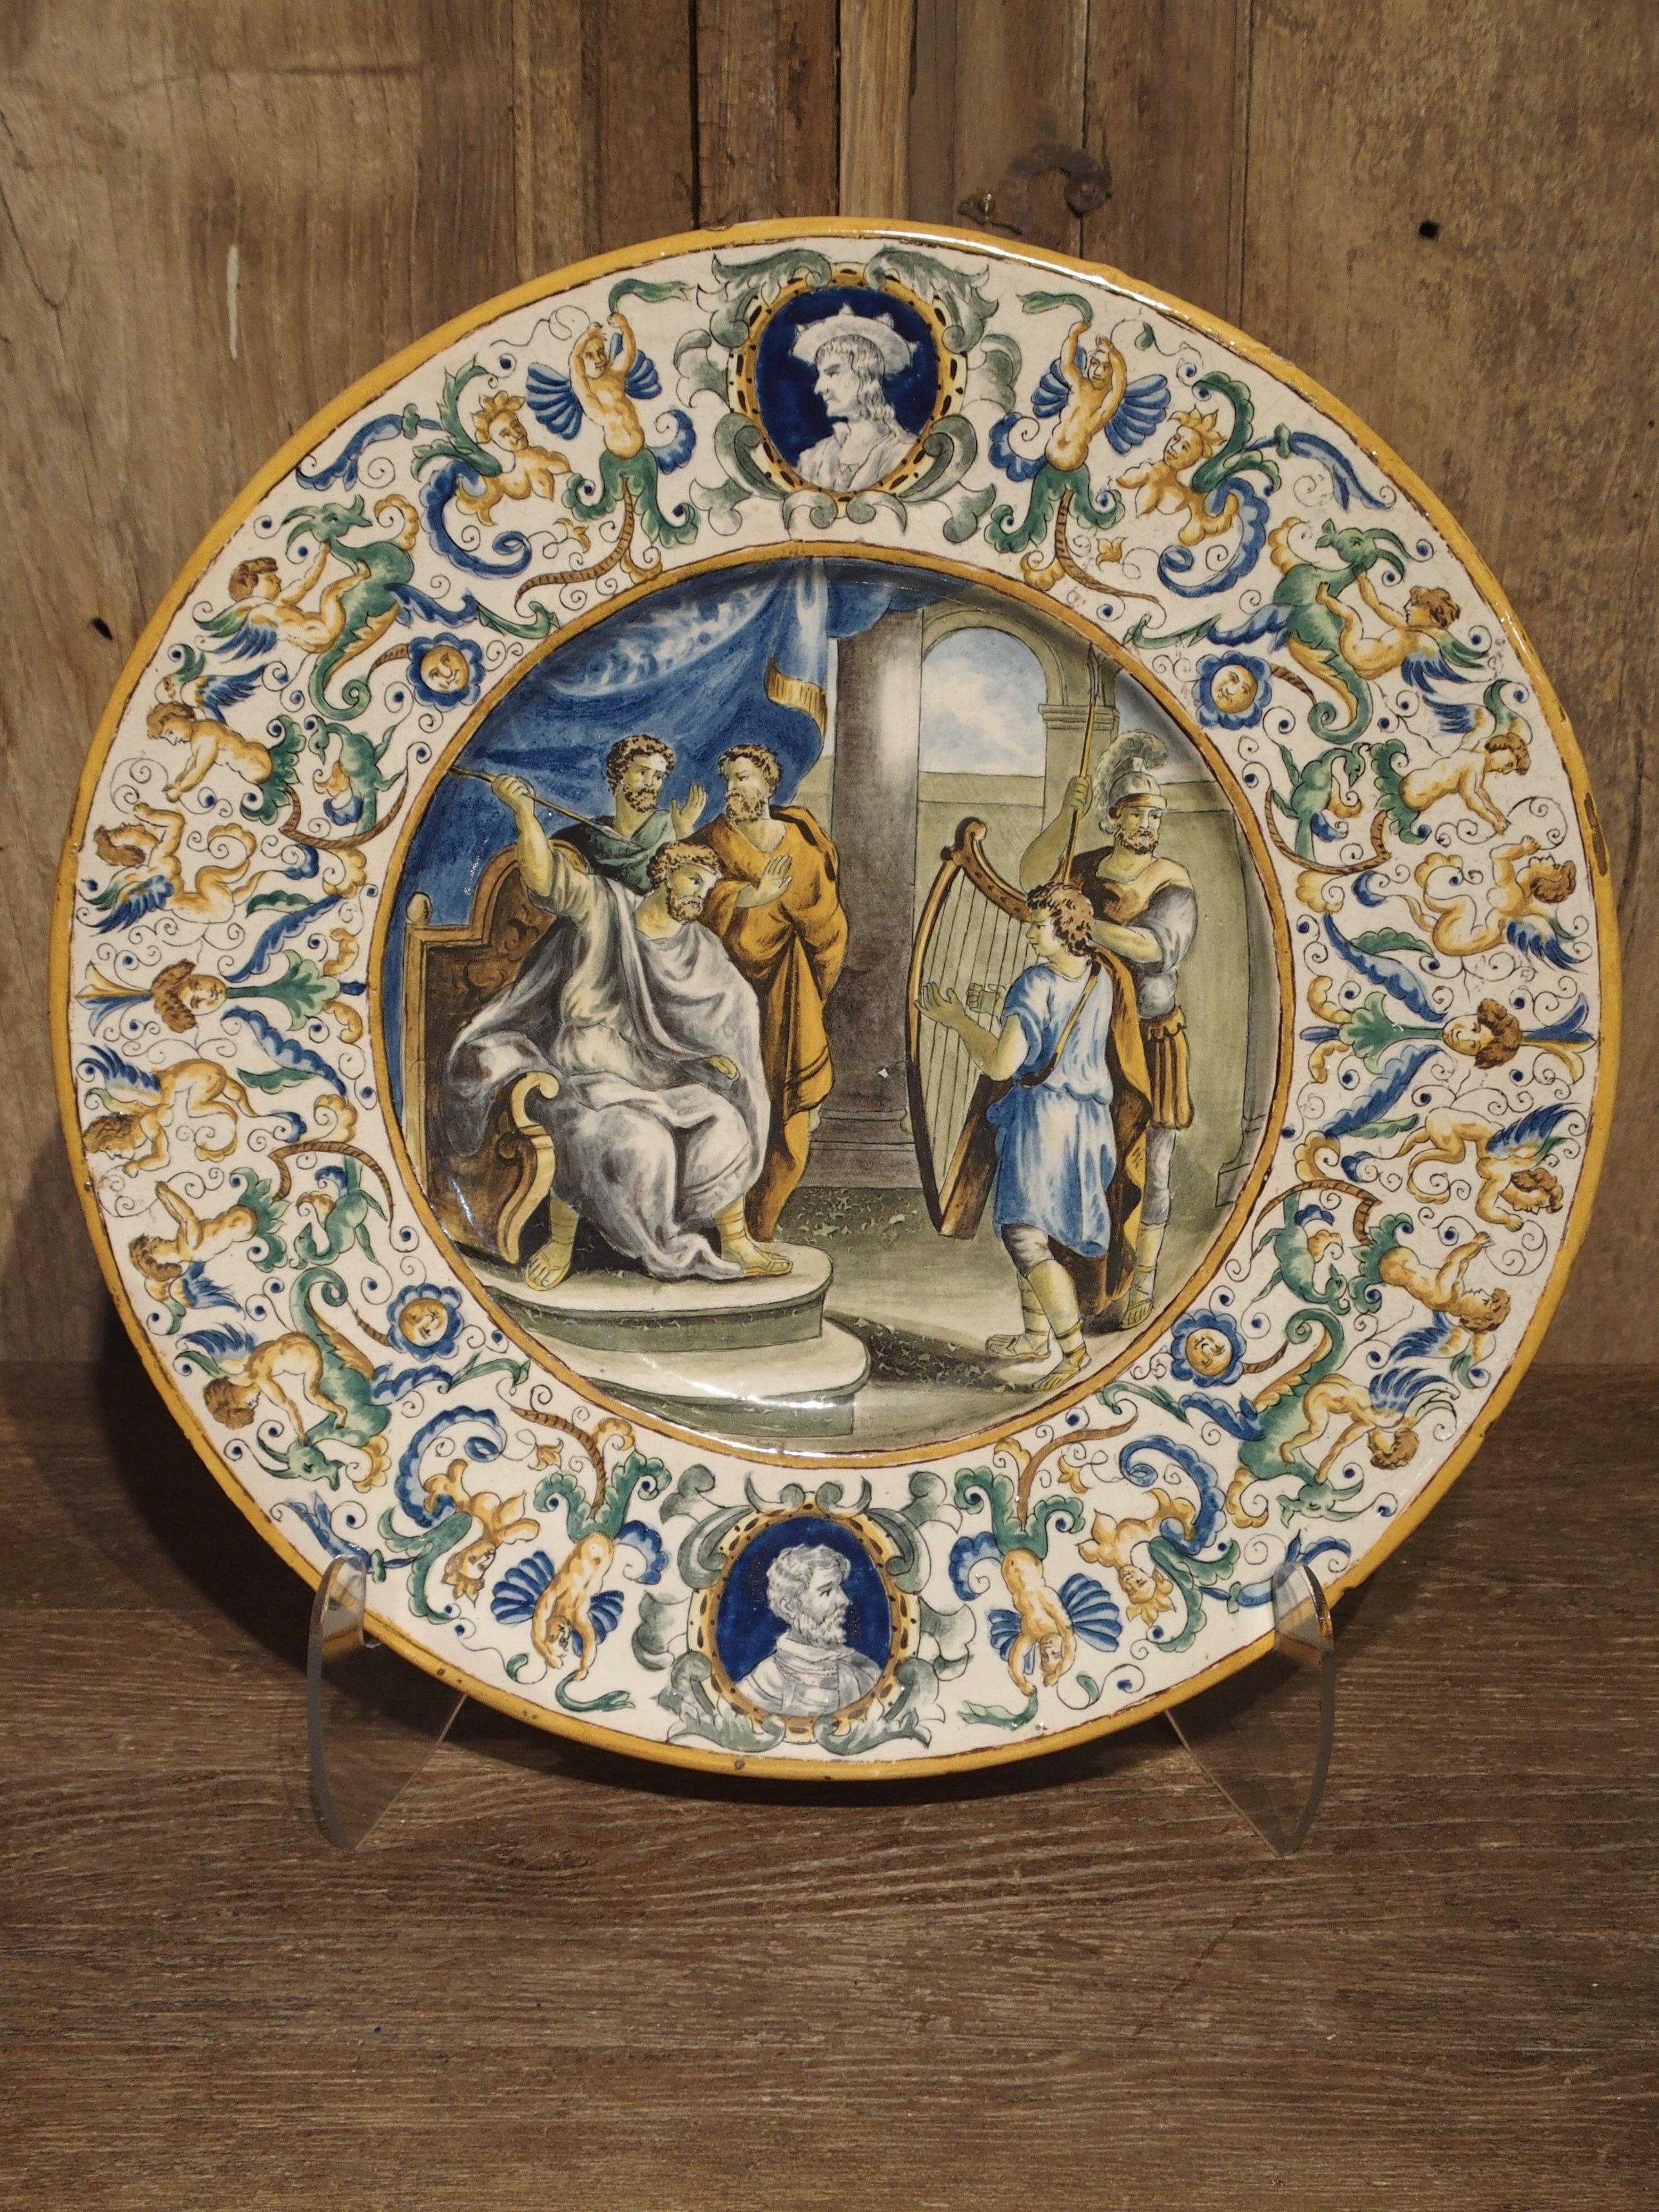 From Italy, this hand painted Majolica platter has two areas of ornamentation. The outer circle has busts of two different men, one on the top of the platter and one at the bottom. These are surrounded by a profusion of demi-figures, faces and